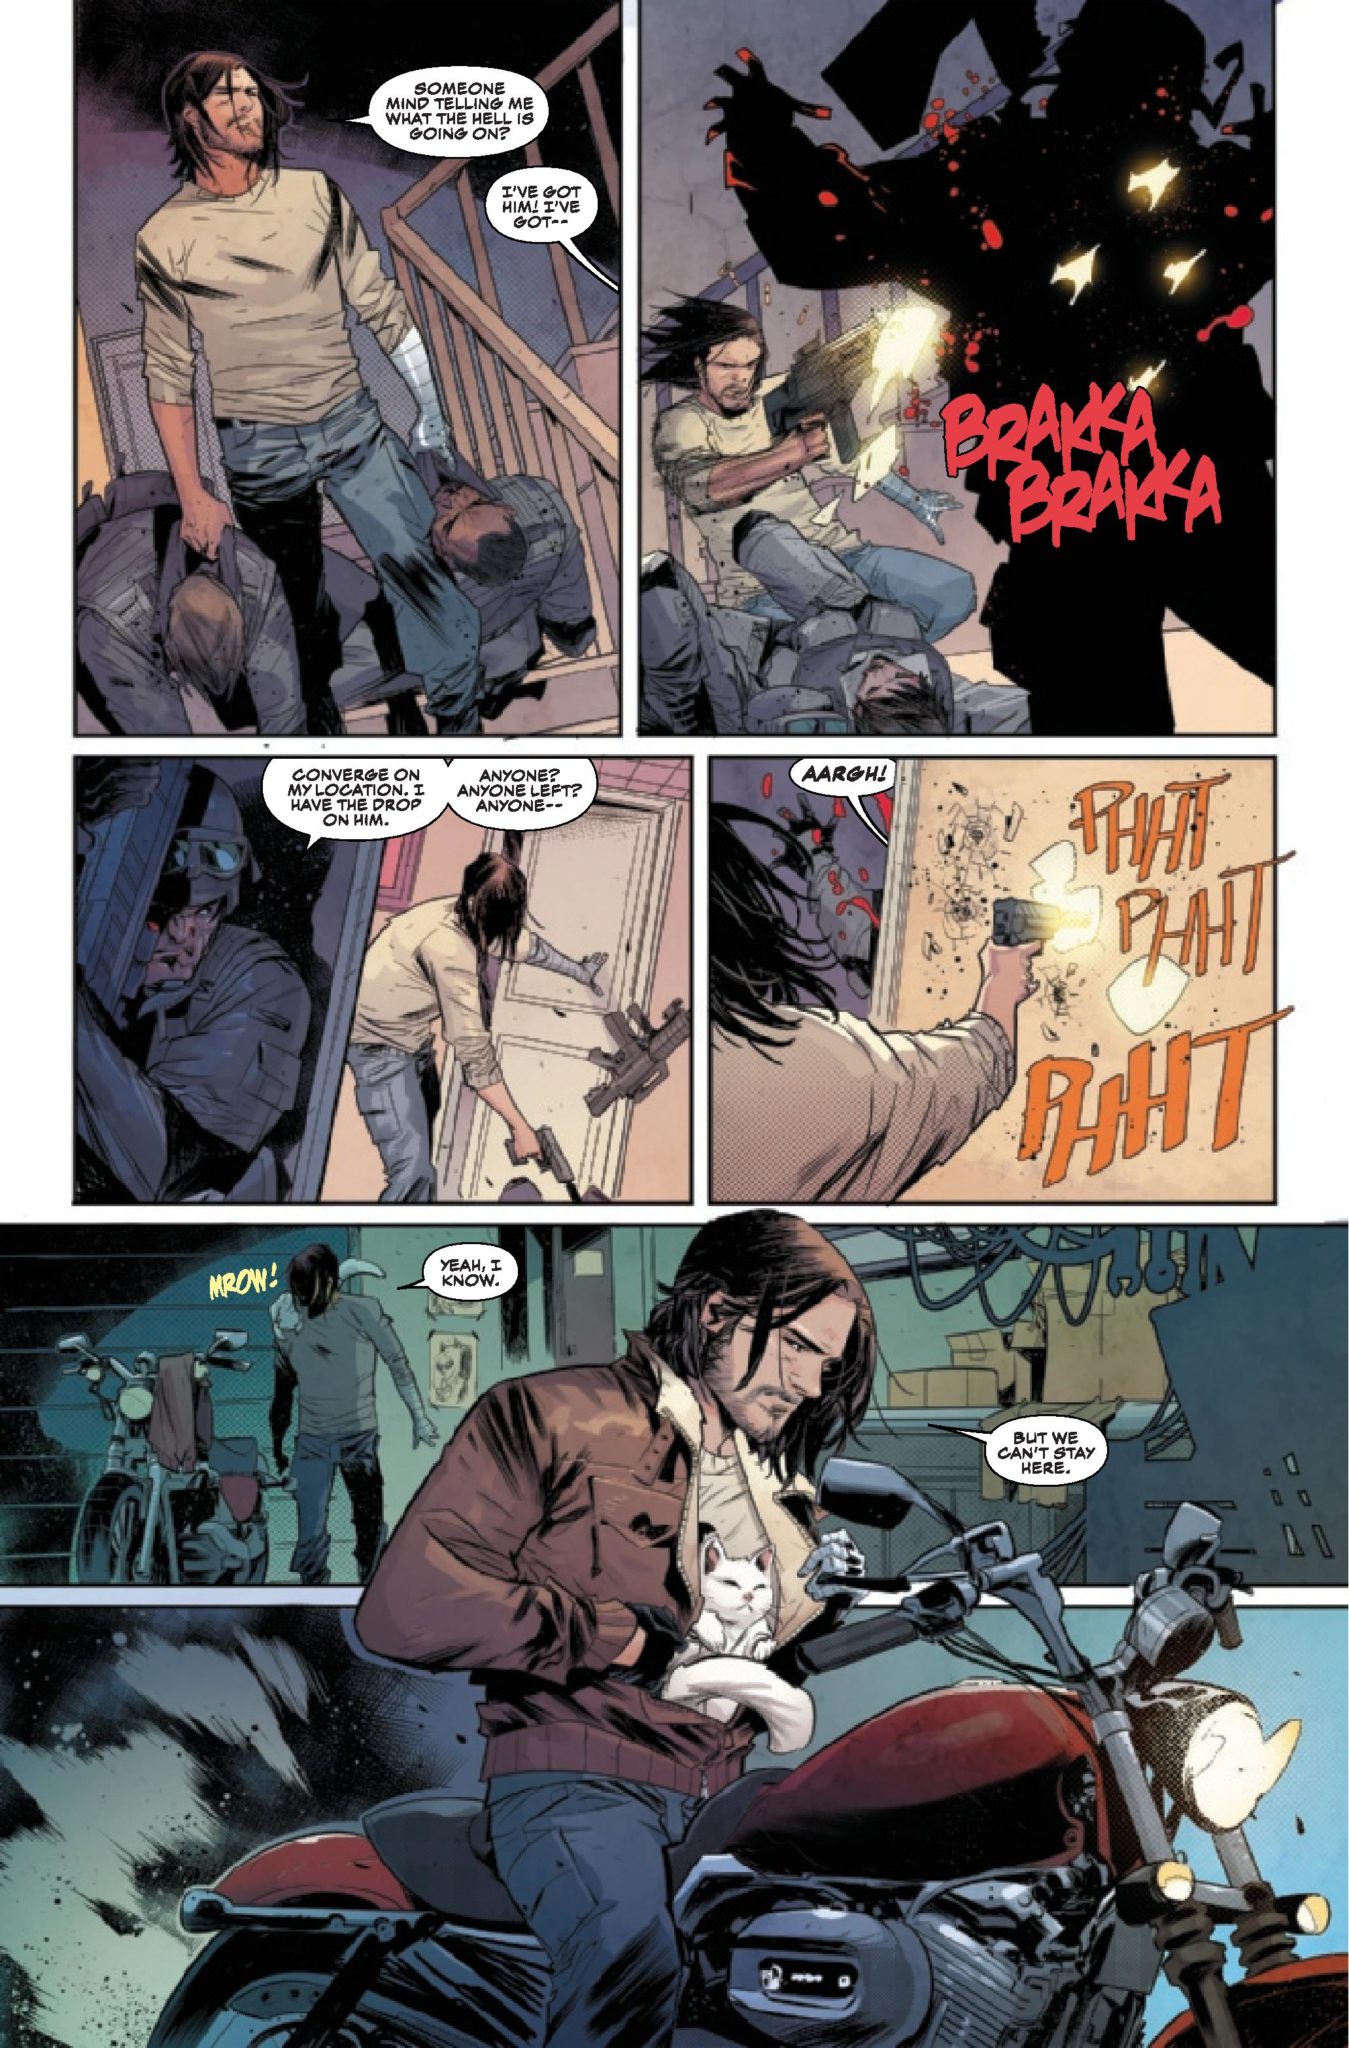 Marvel Comics Preview: FALCON & WINTER SOLDIER #1 - Save The Cat!